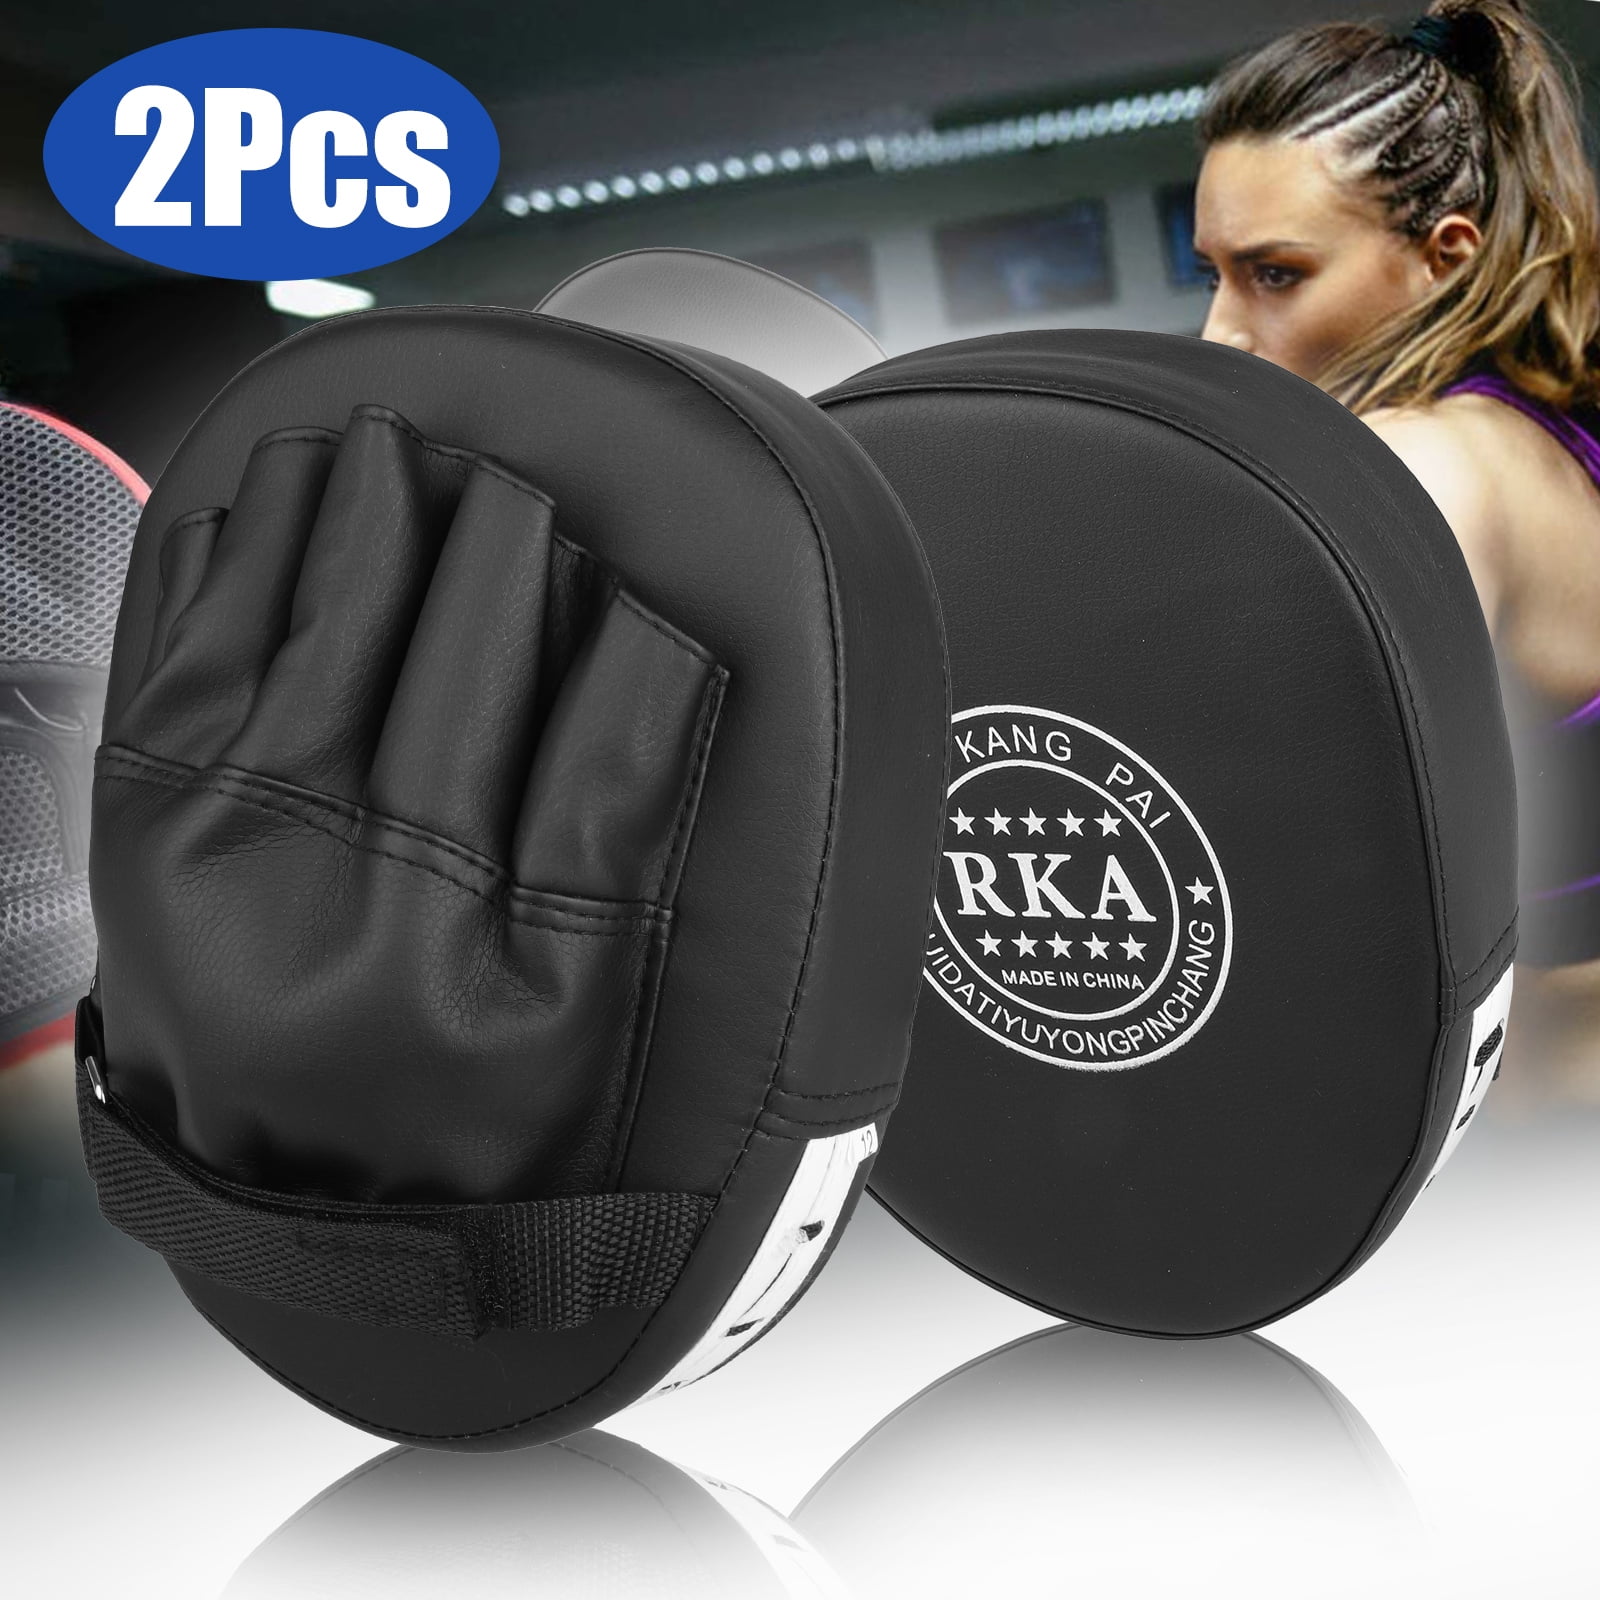 VELO Boxing Gloves Punch Training Mitts Sparring Muay Thai Gel Pad Gloves